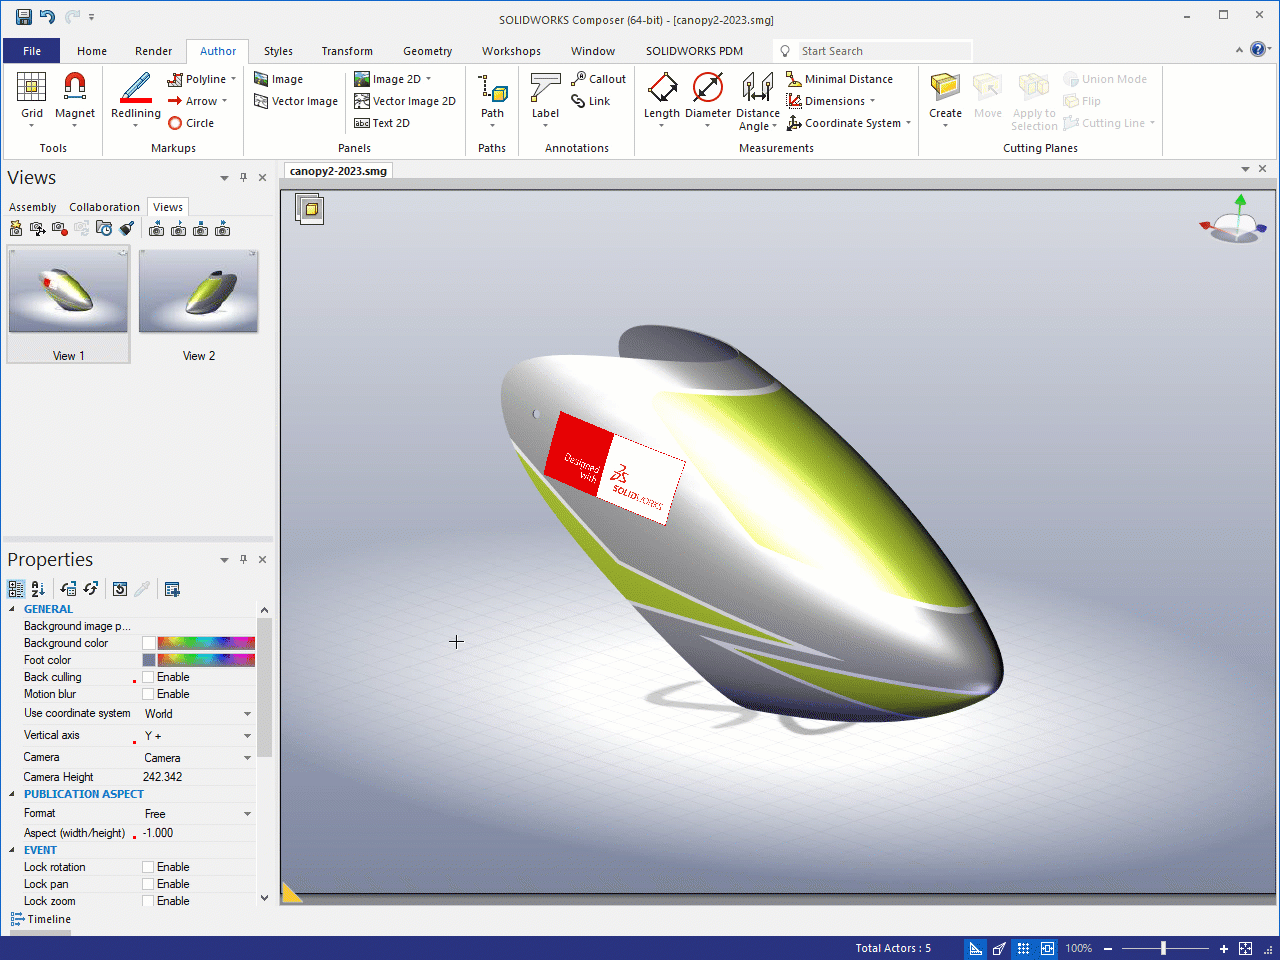 How to Fix SOLIDWORKS Decals Not Showing Up in Composer